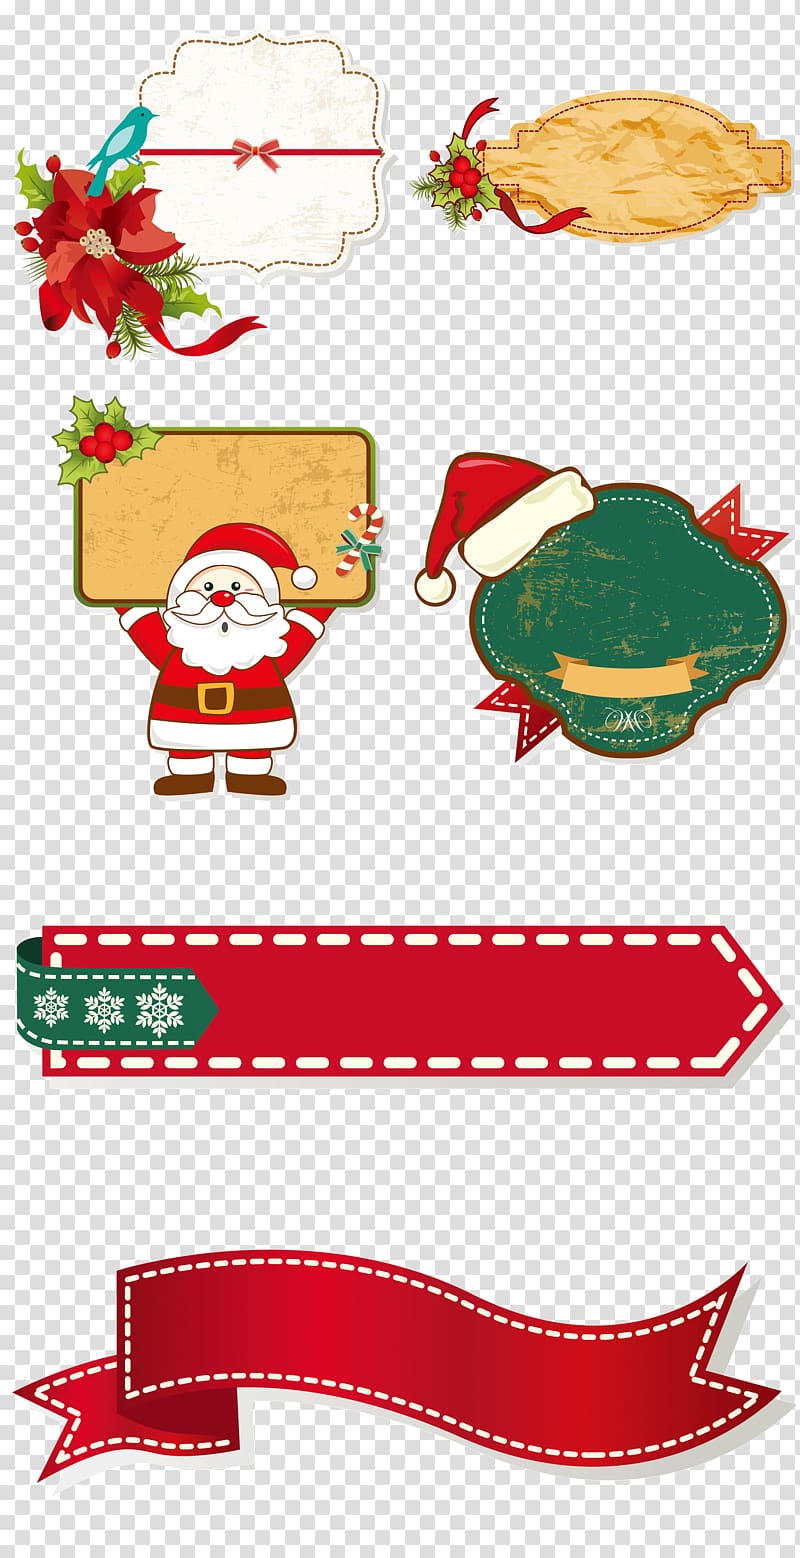 red ribbon illustration, Santa Claus Christmas decoration , Cartoon Christmas Border Collection transparent background PNG clipart